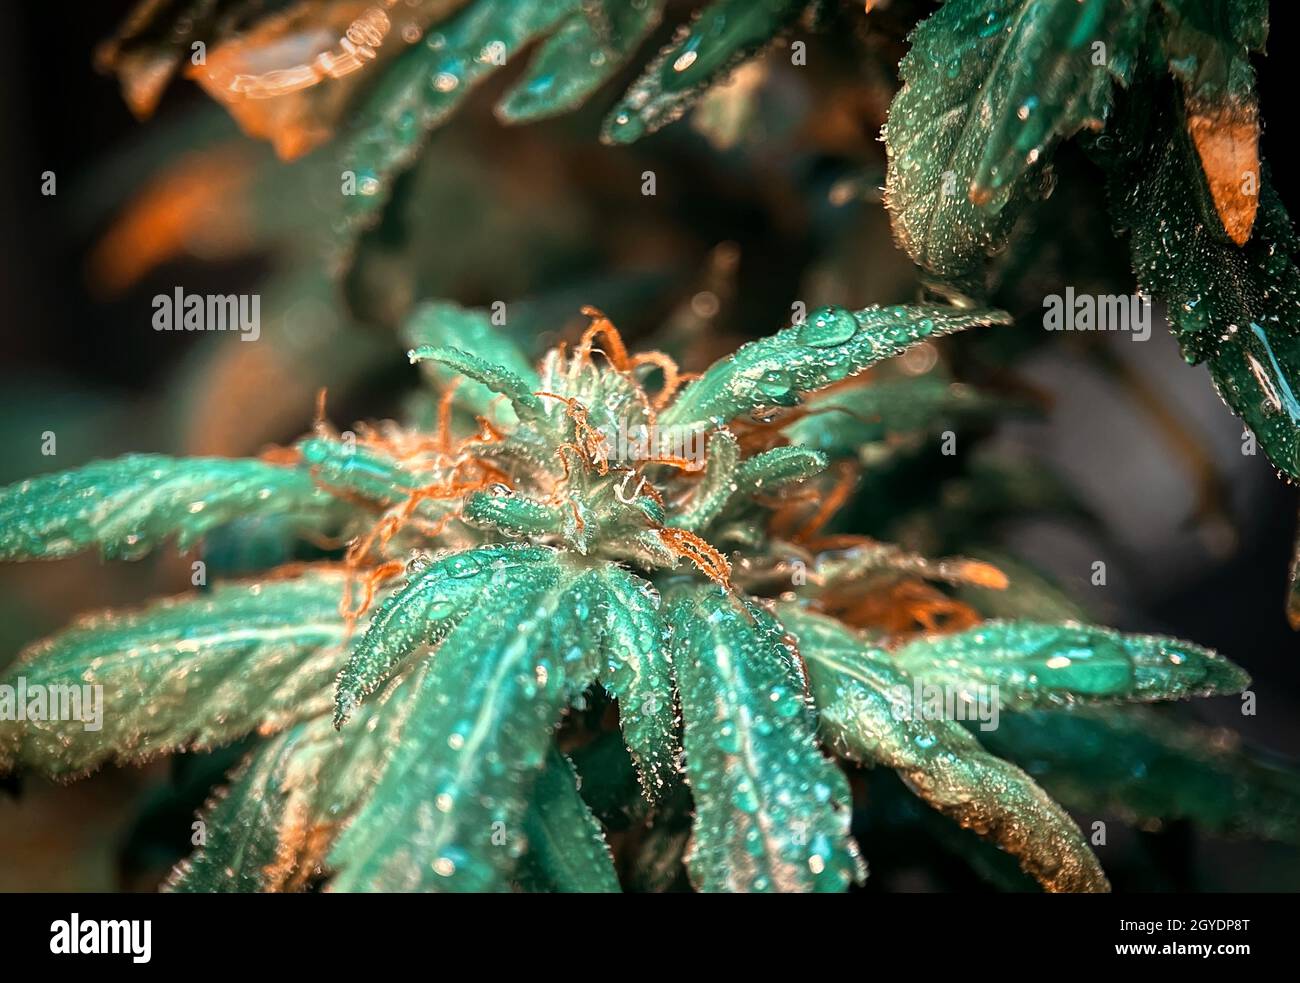 Macro shot of Cannabis Marijuana plant in early flowering stage with water droplets Stock Photo